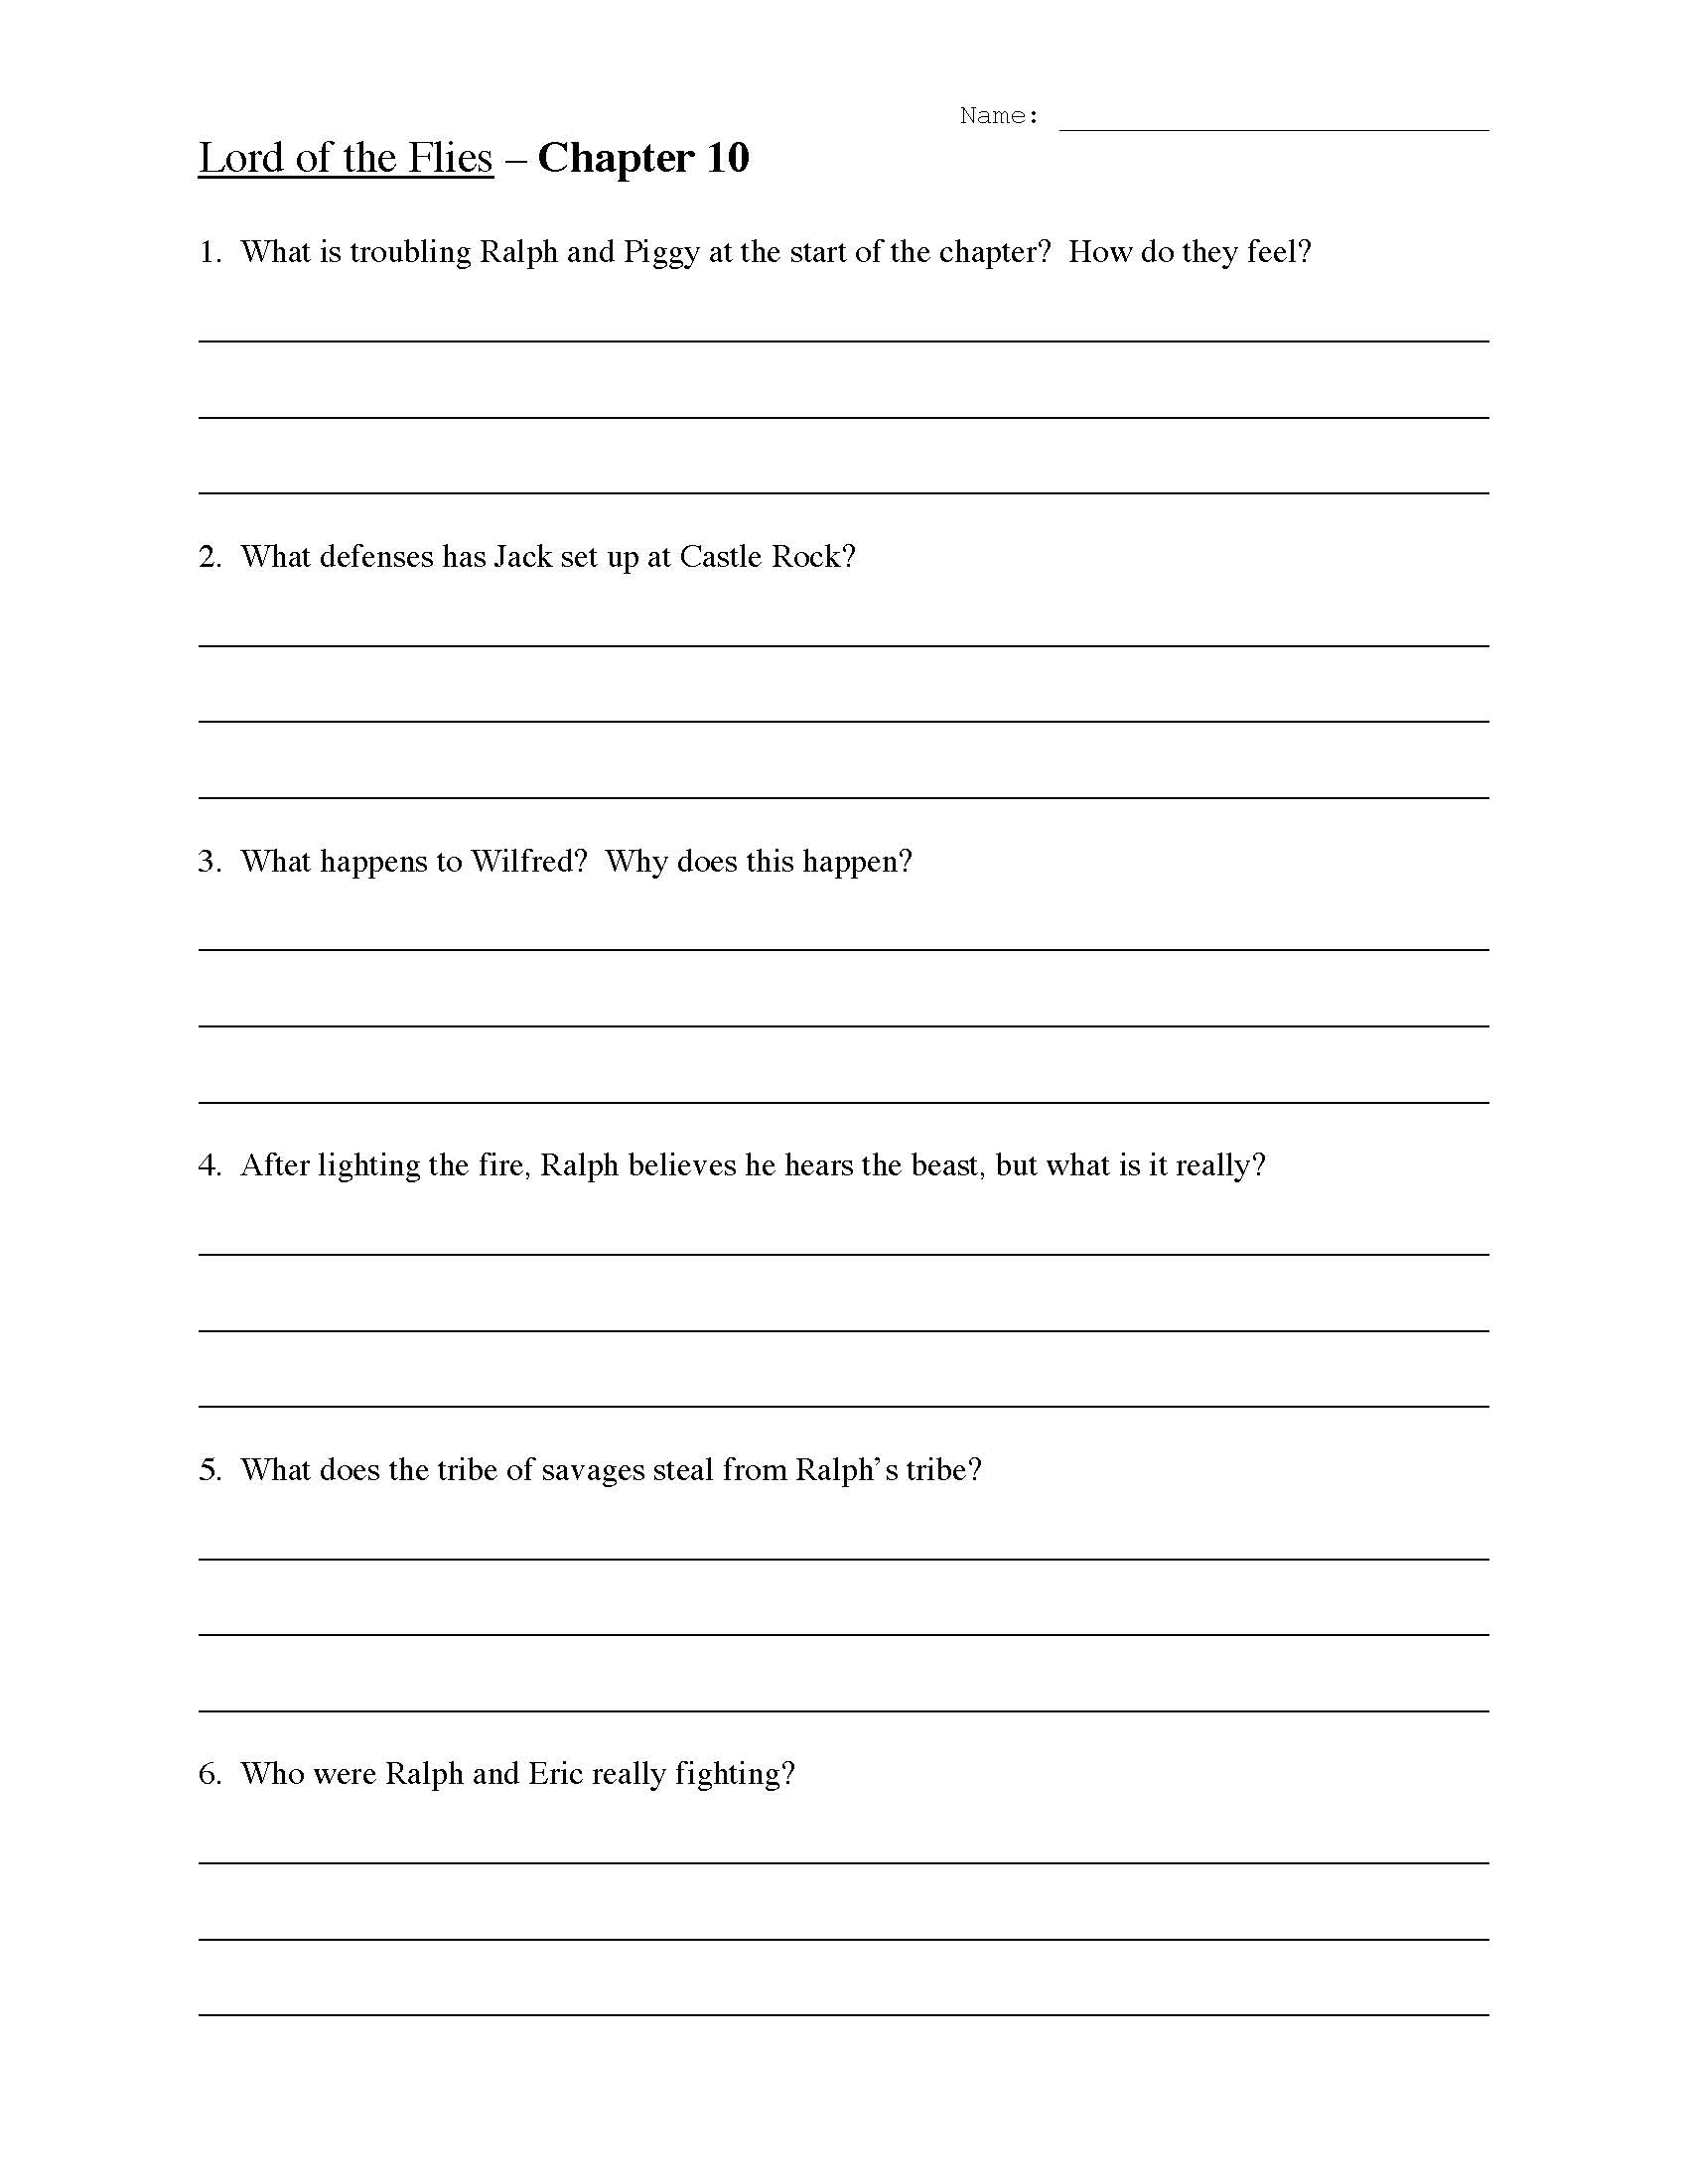 This is a preview image of the Lord of the Flies Chapter Ten Worksheet.